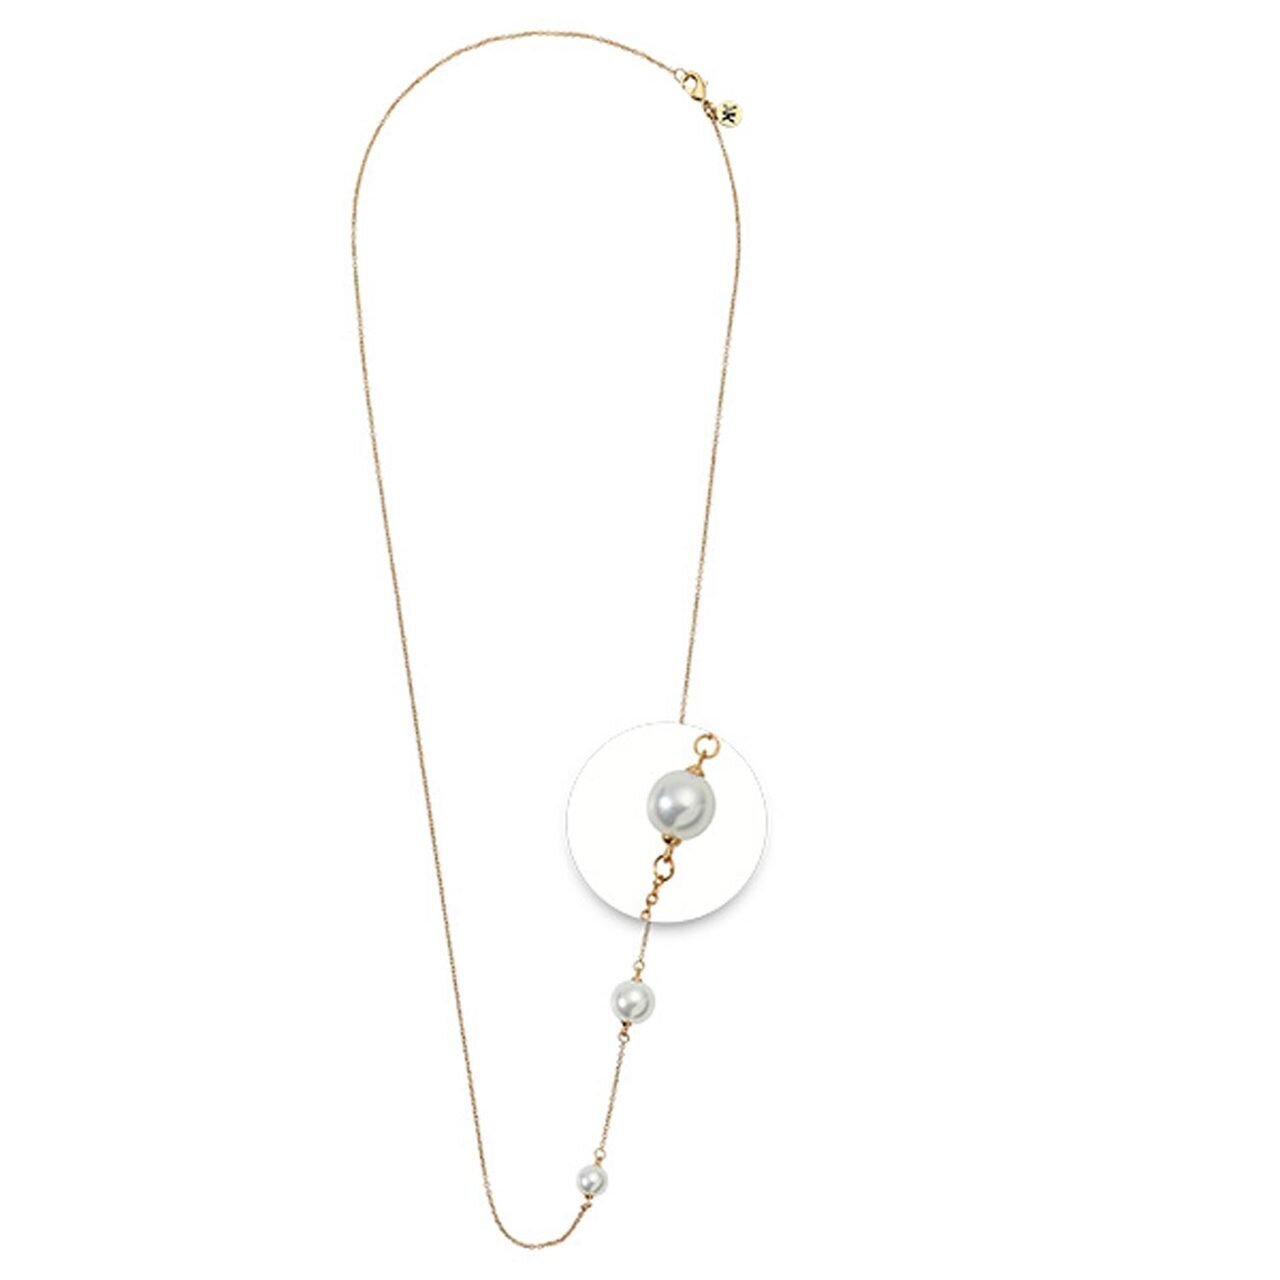 Nikki Lissoni White Pearl Gold-plated Necklace 80cm Compatible with Pendant N1032G80